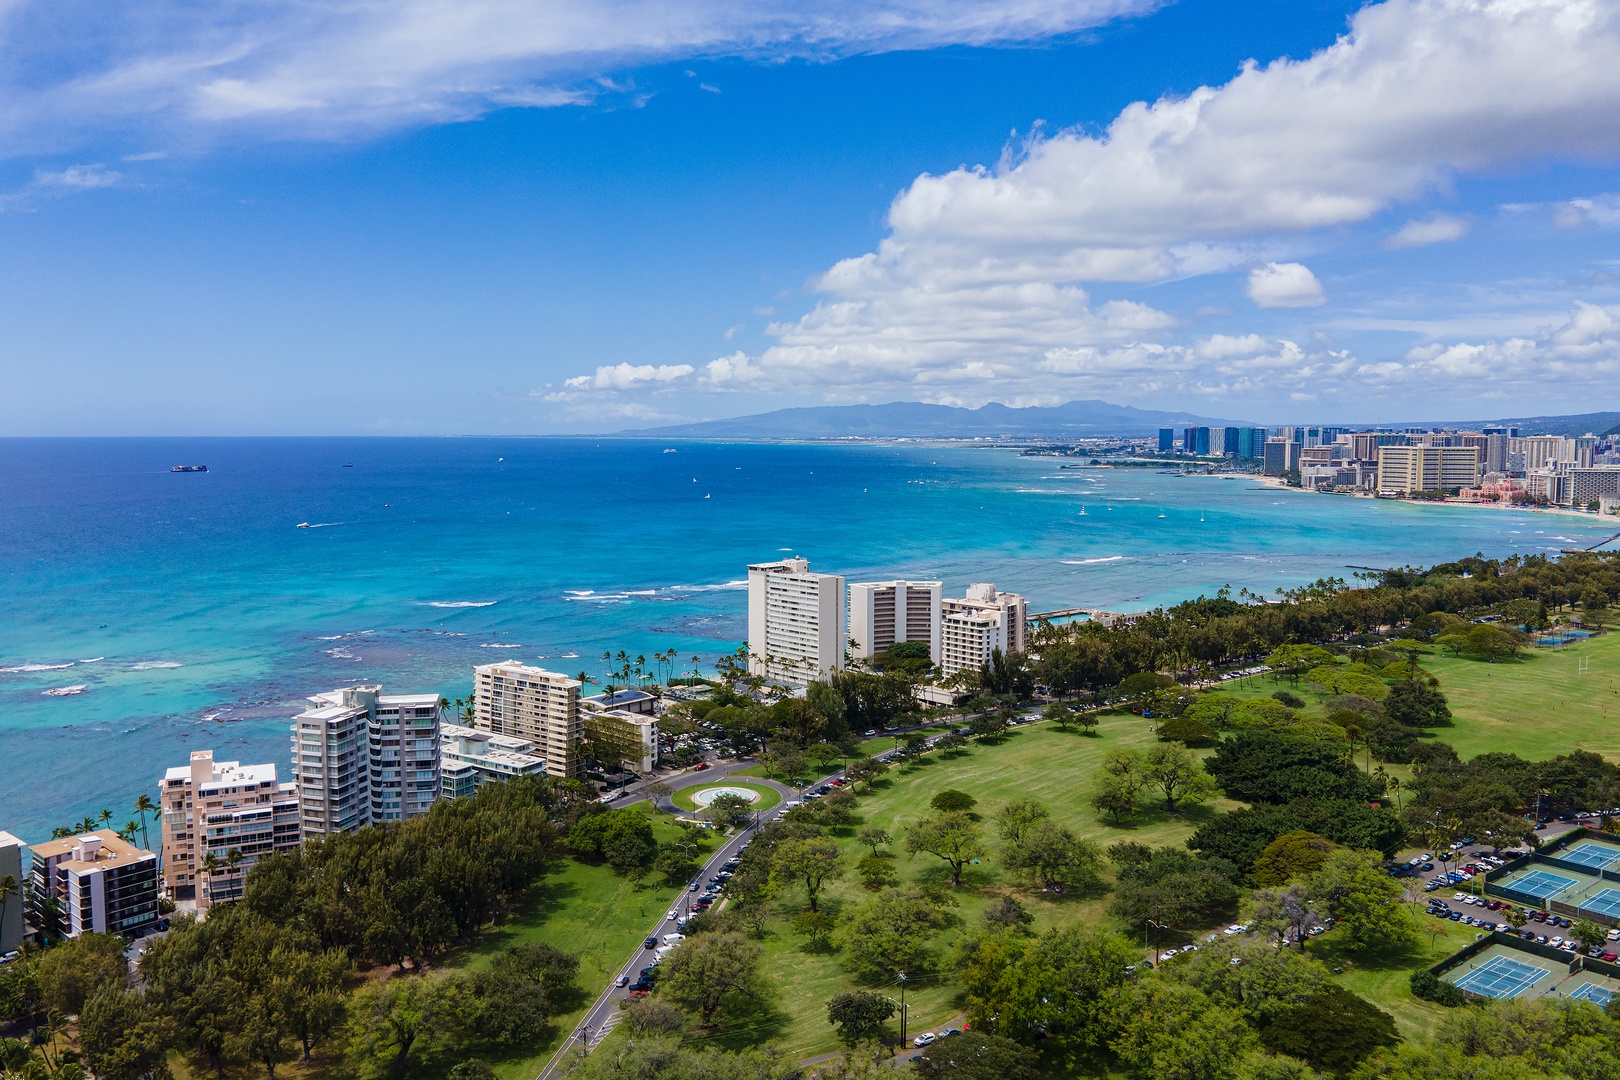 Honolulu Vacation Rentals, Diamond Head Sunset - Don't miss out on the chance to experience the best of Hawaii's beauty and elegance